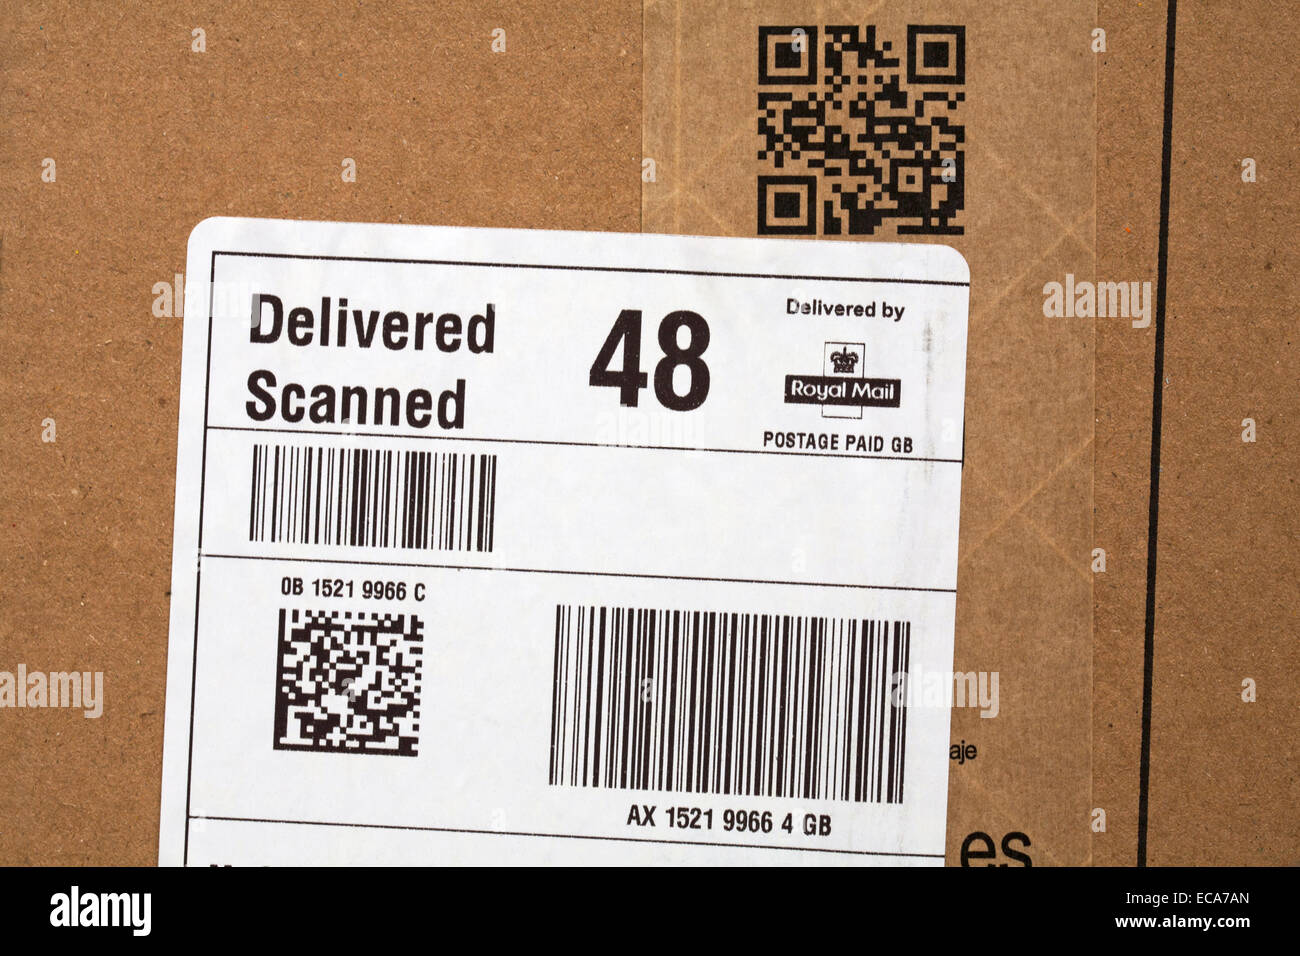 Delivered scanned, delivered by Royal Mail and scan me on parcel from